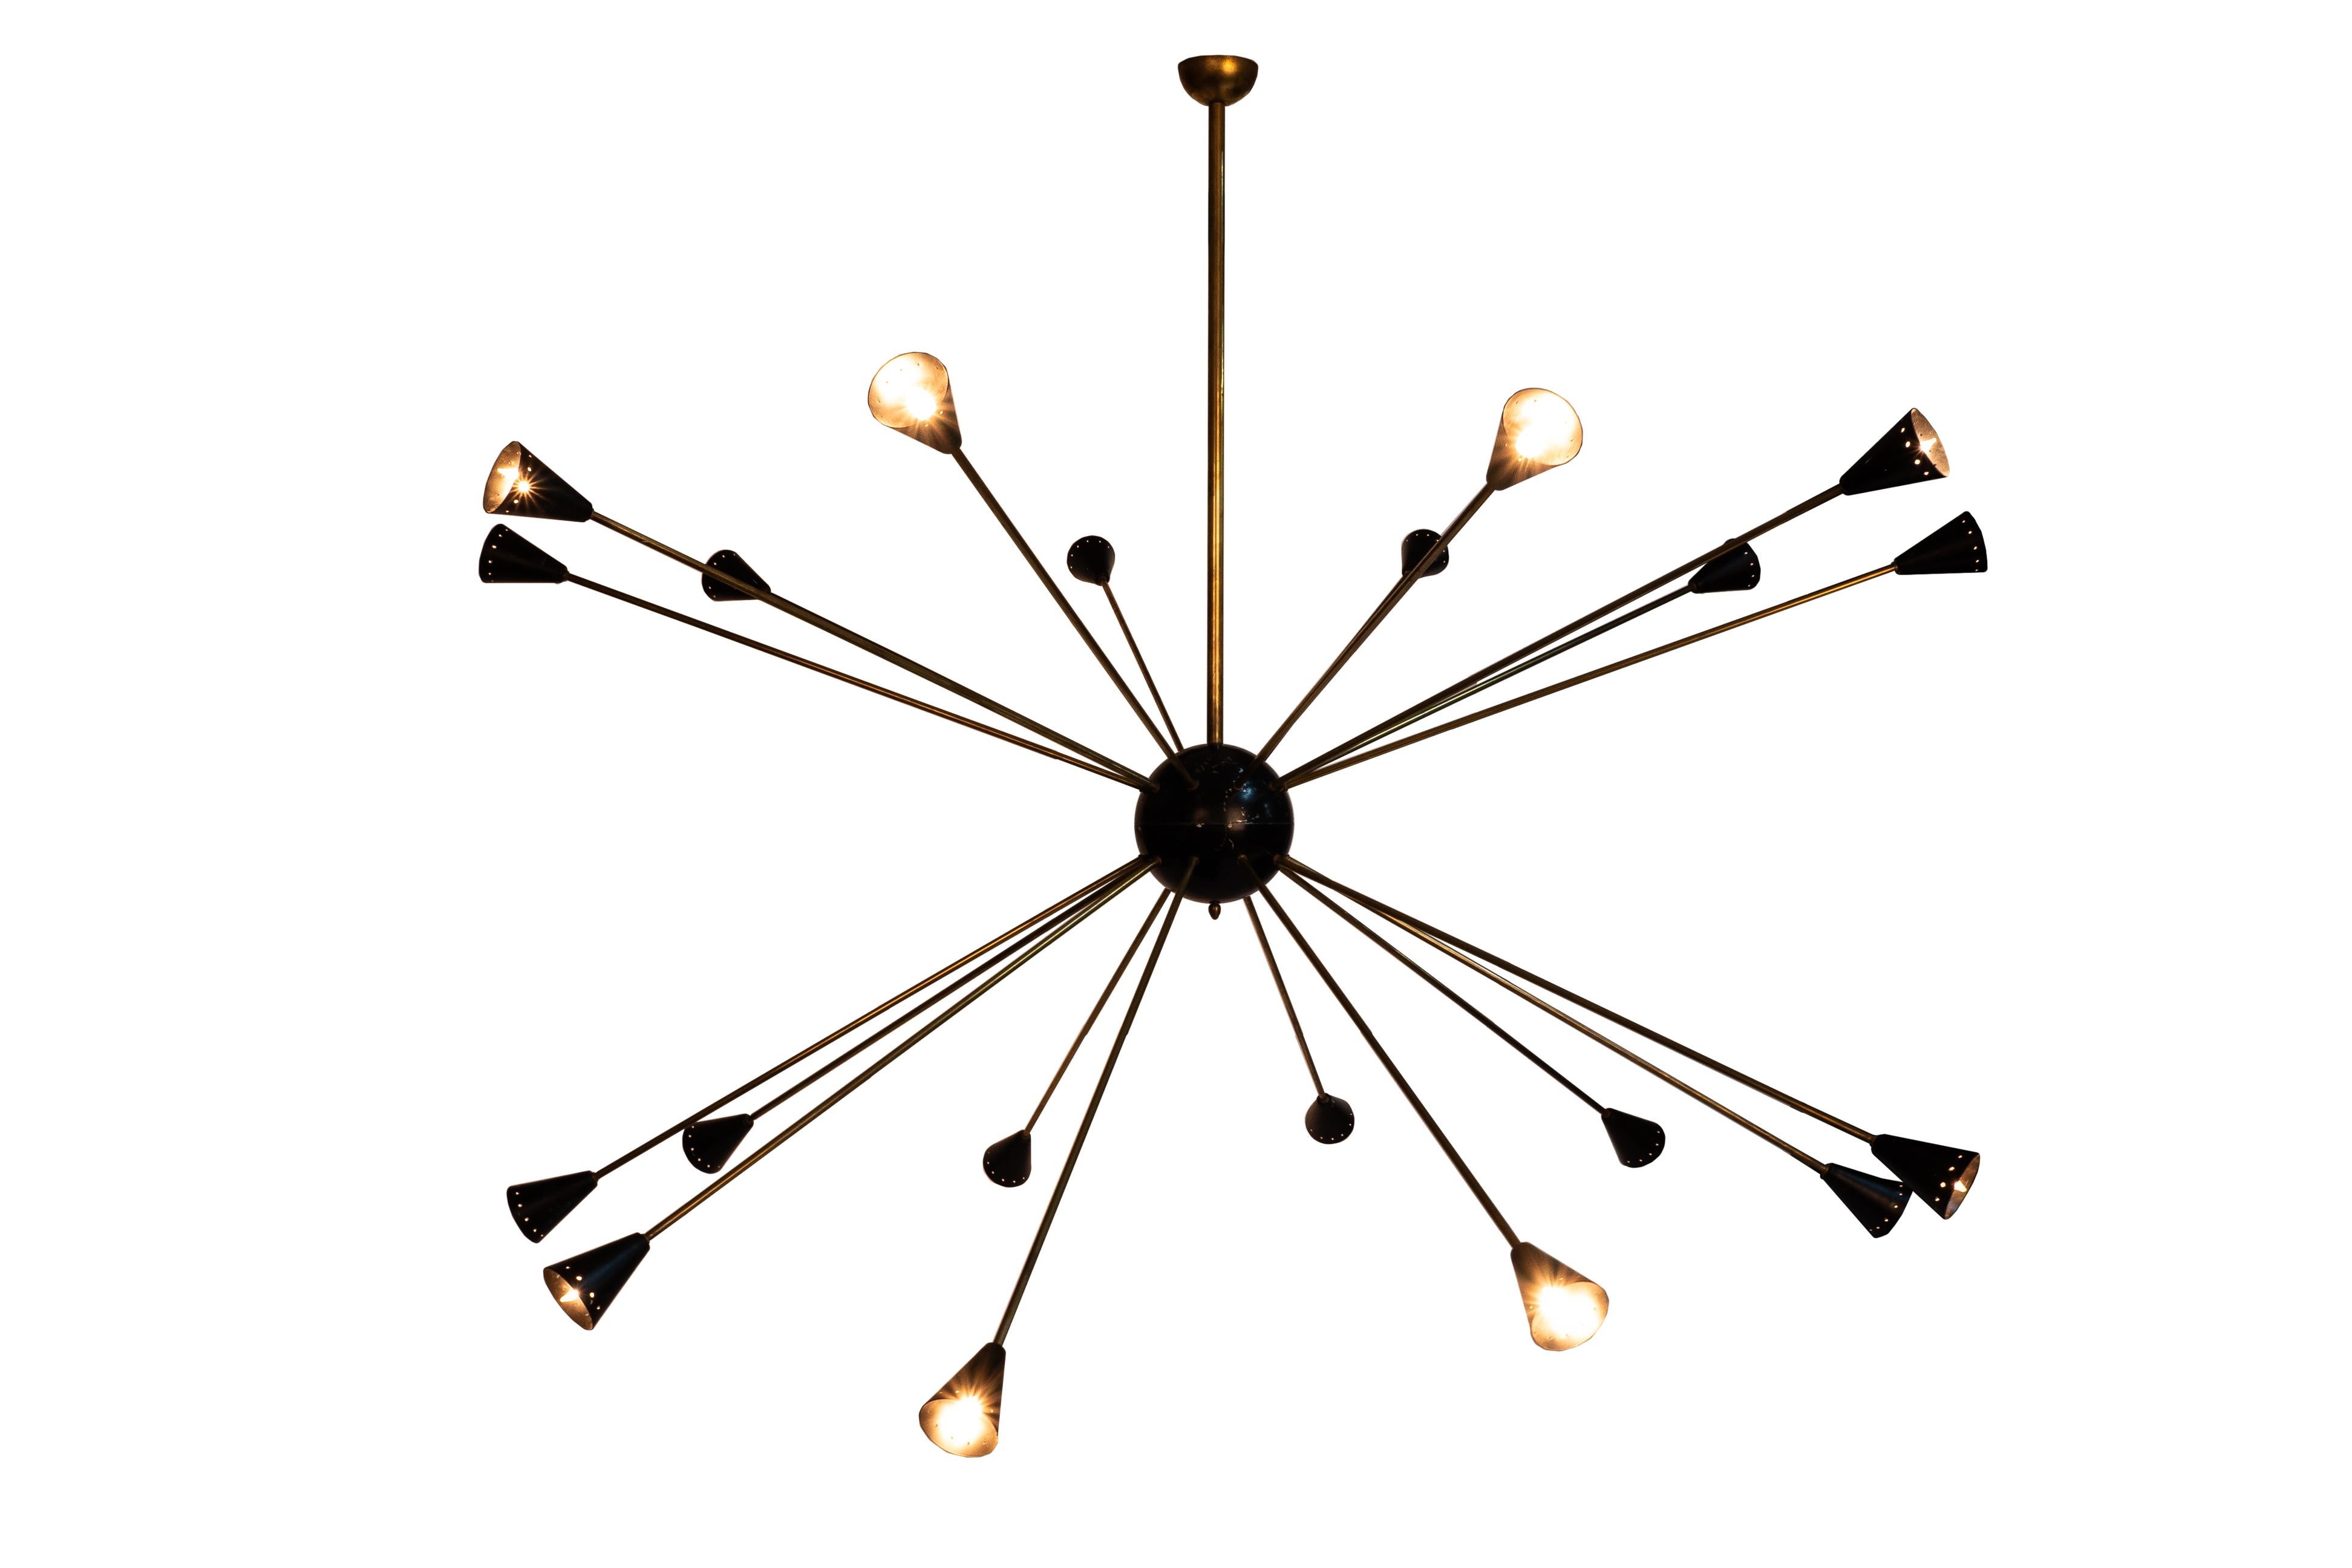 Large Italian Stilnovo Sputnik chandelier with 20 arms in brass with trumpet diabolo shades enameled in black. Great original / vintage condition.
Holds E14 bulbs

Made in Italy, circa 1950.